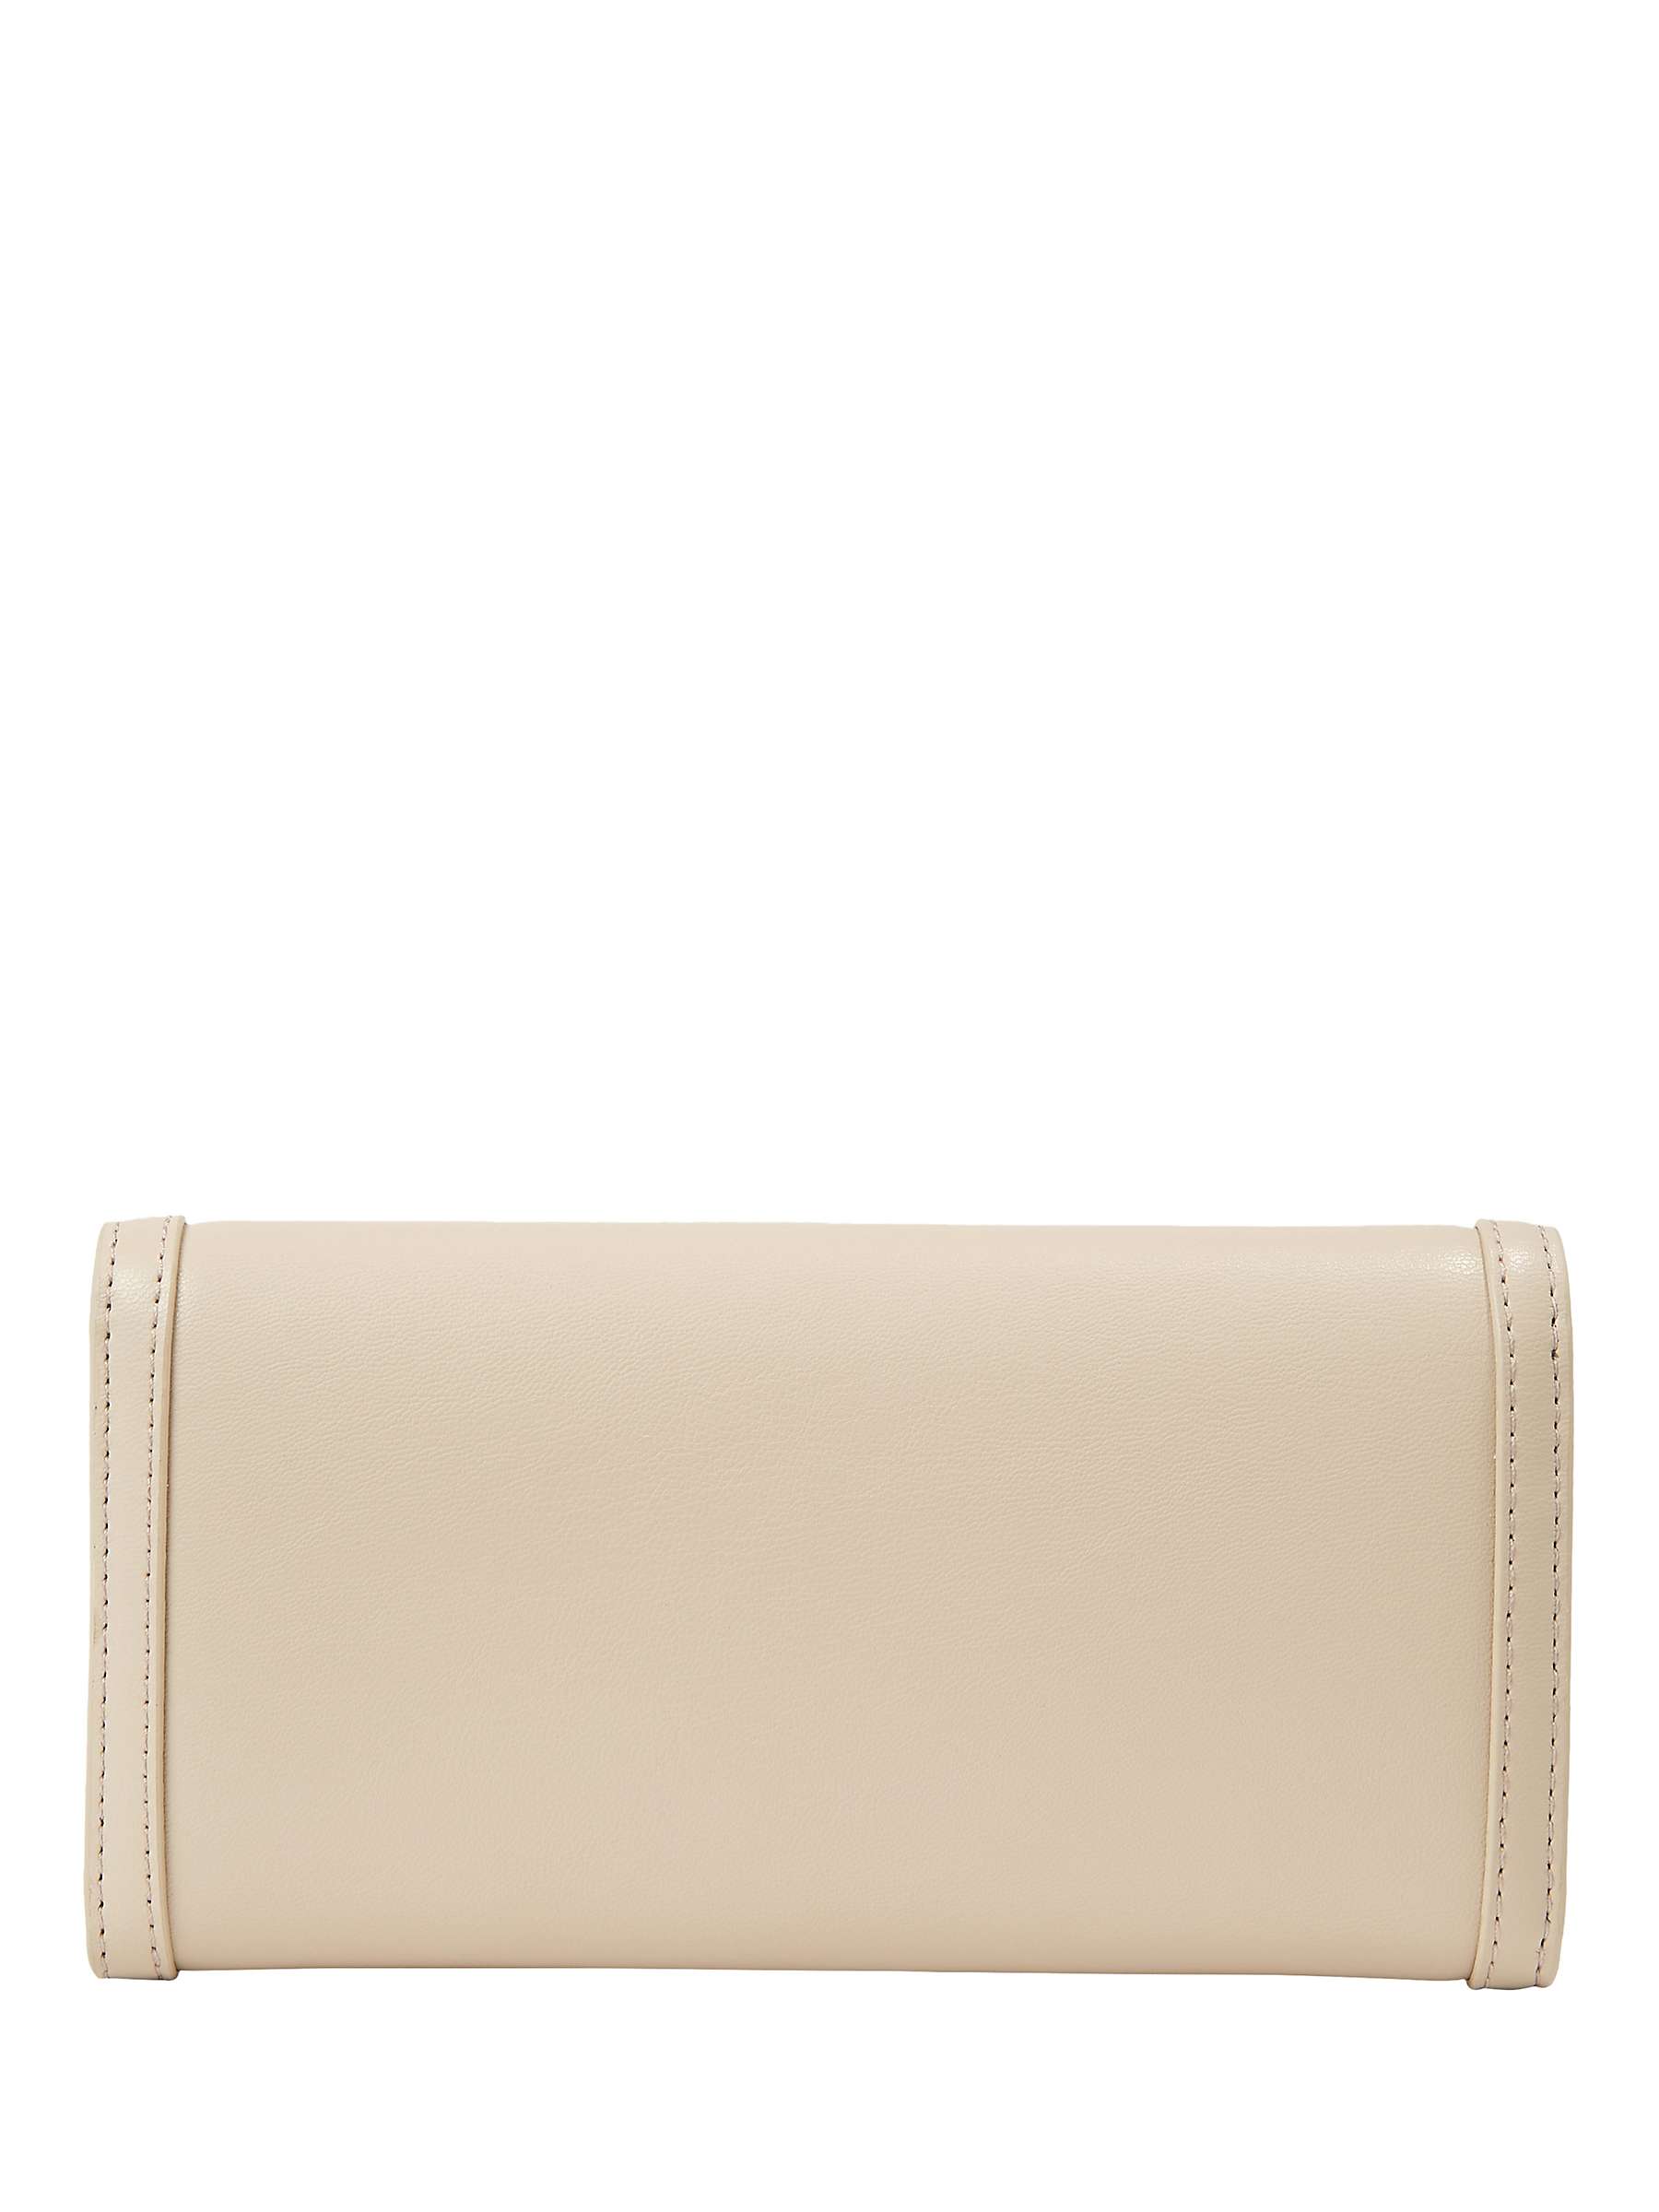 Buy Tommy Hilfiger City Compact Bi-Fold Wallet, Clay Online at johnlewis.com